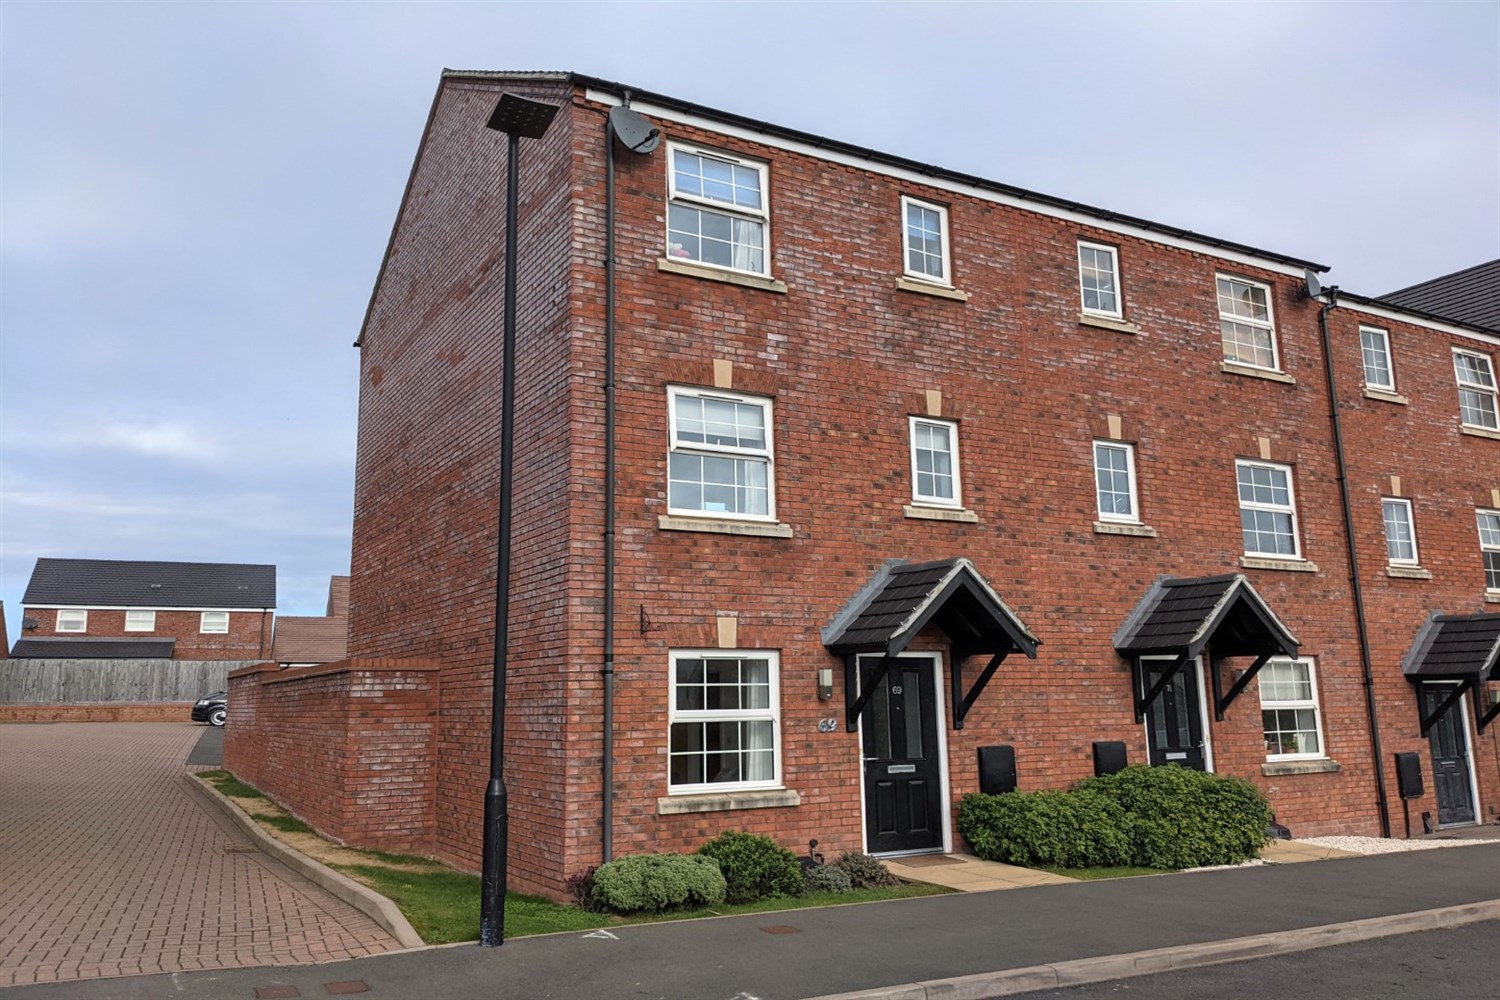 69 Red Norman Rise, Holmer, Hereford